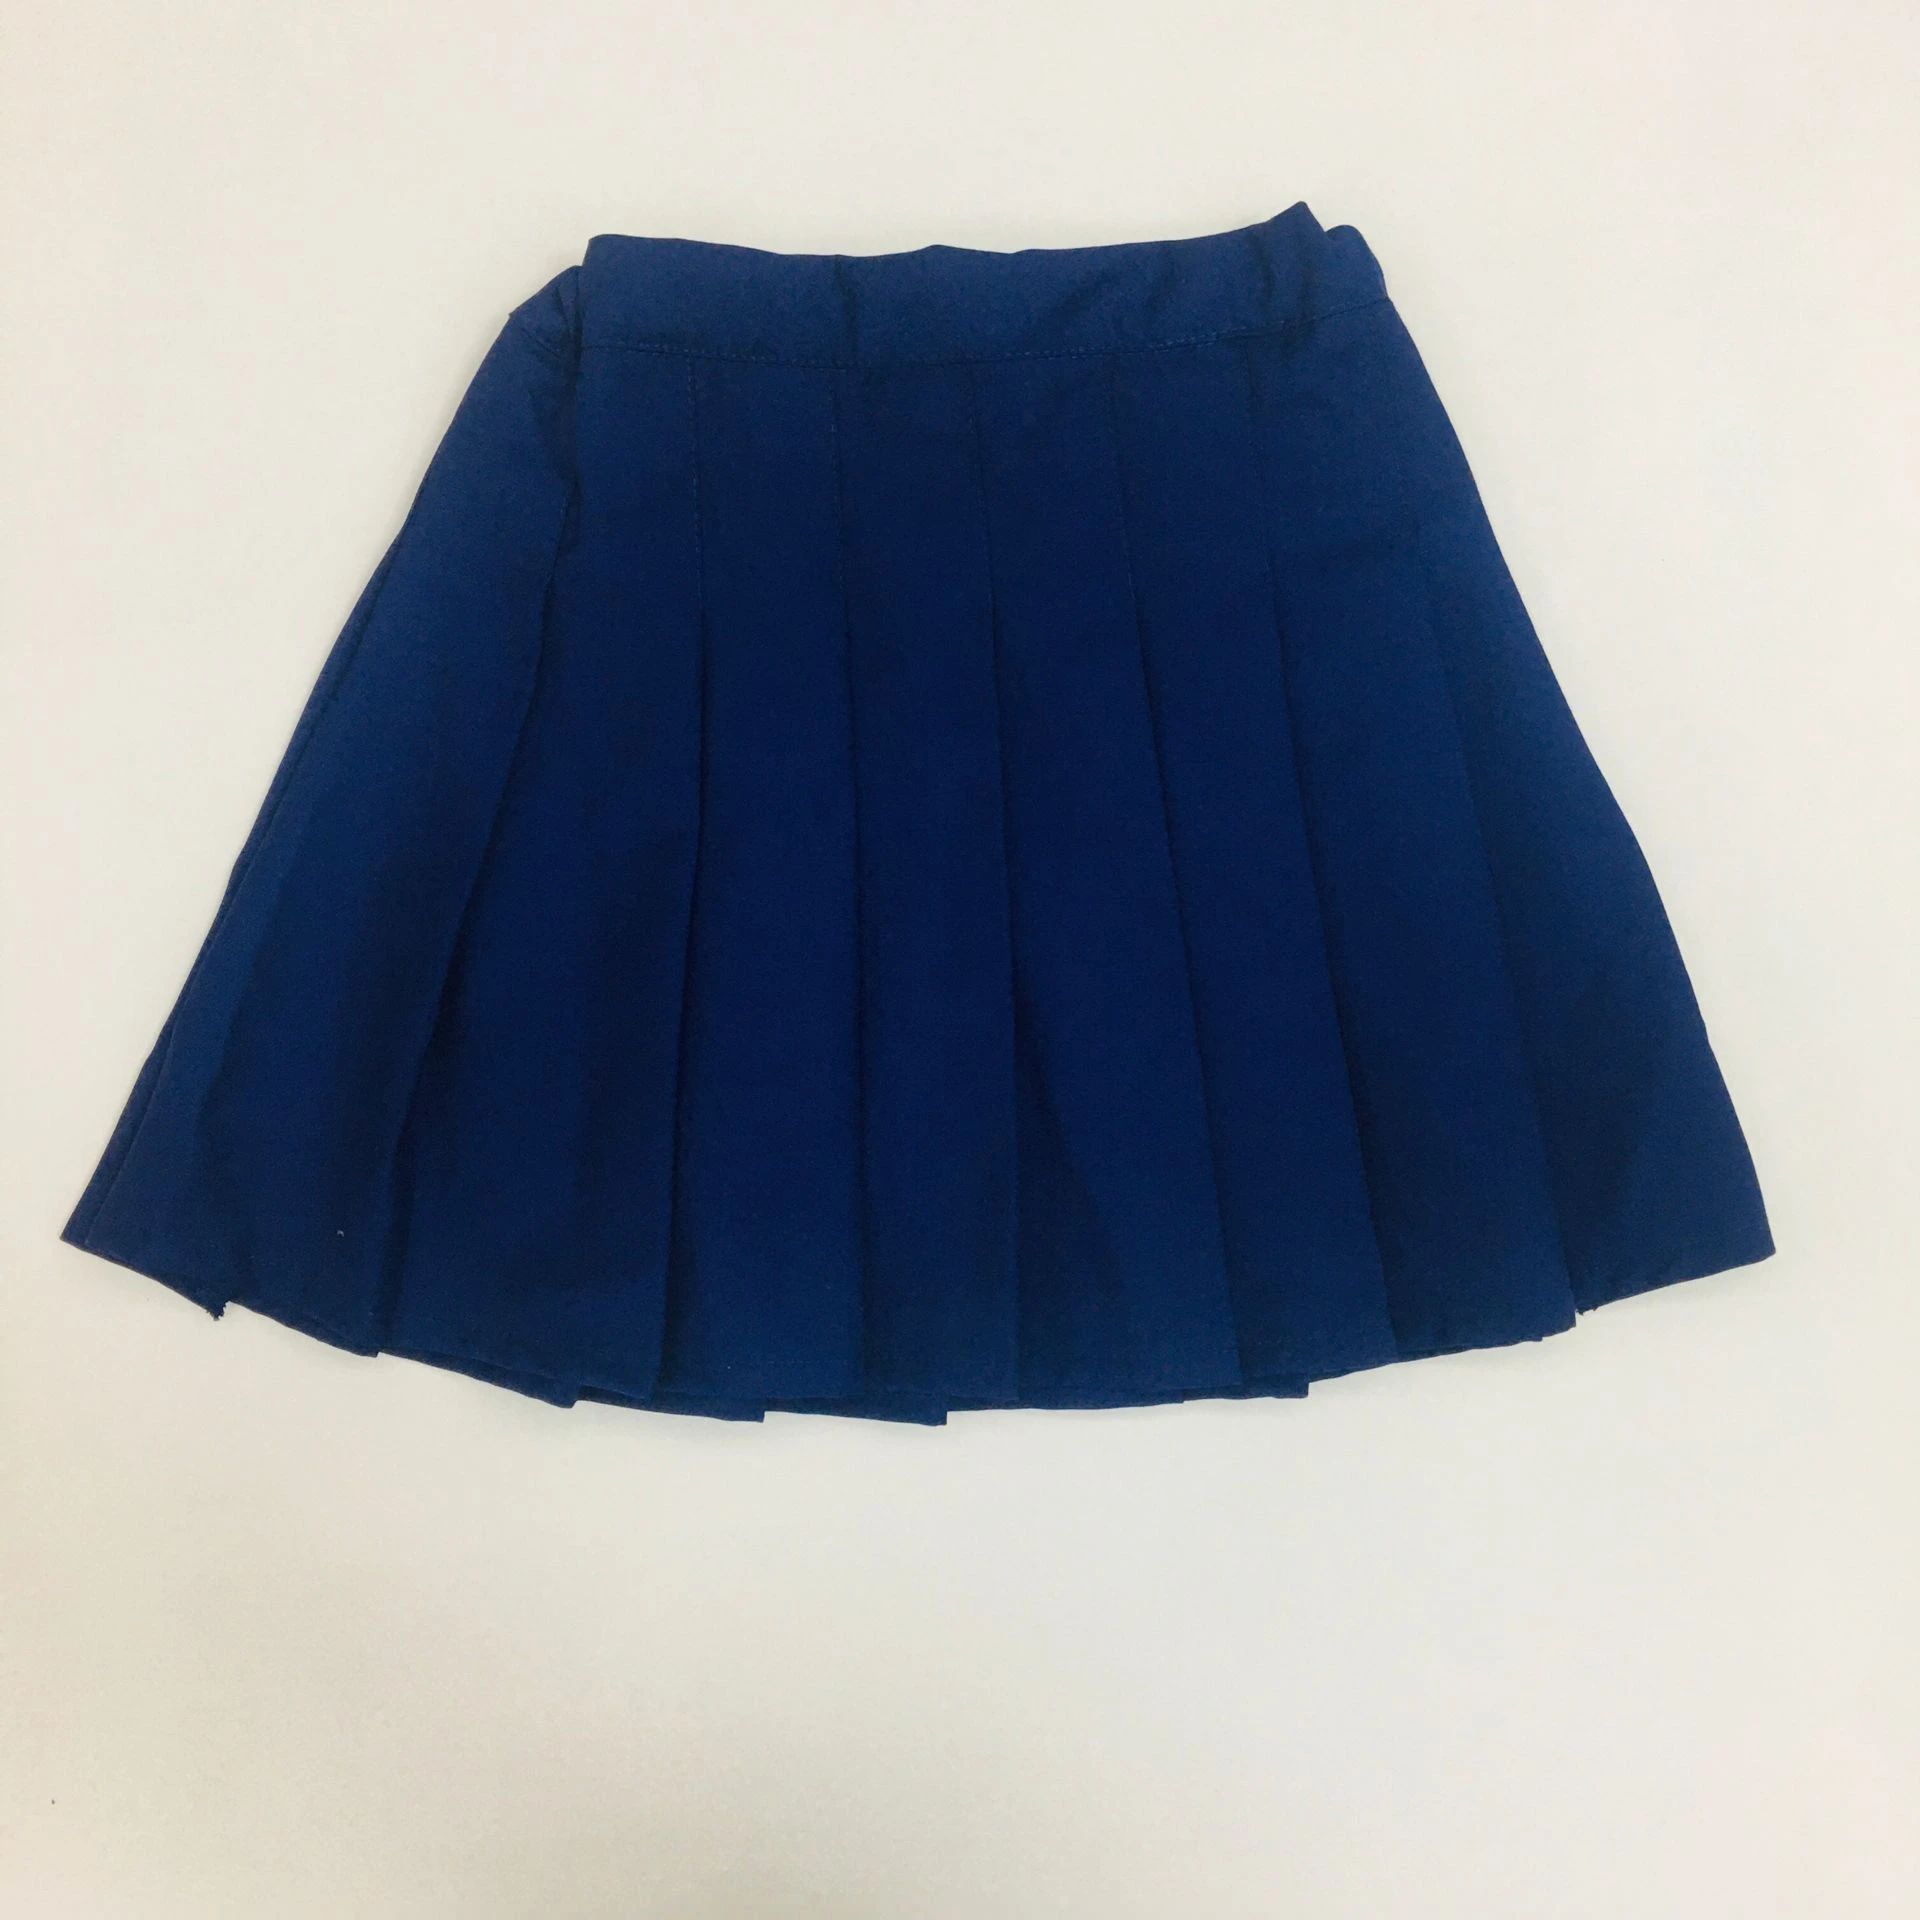 Factory Supply Attractive Price Fashion Pleated Women Casual Short Skirt